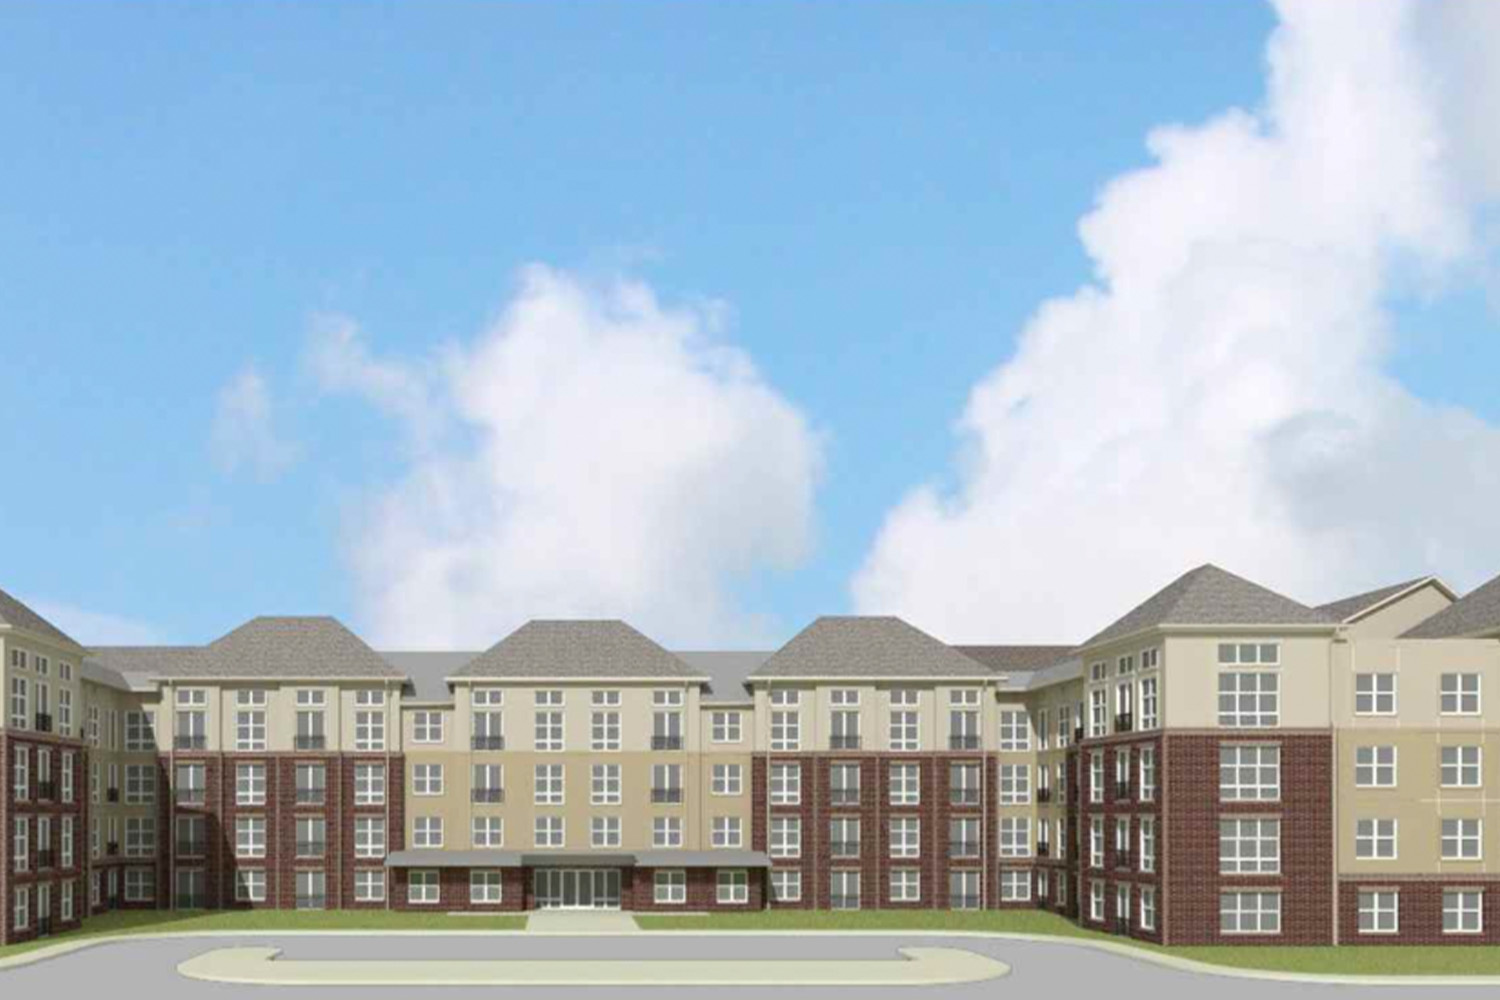 rendering of Harmon Cove seen from the front 